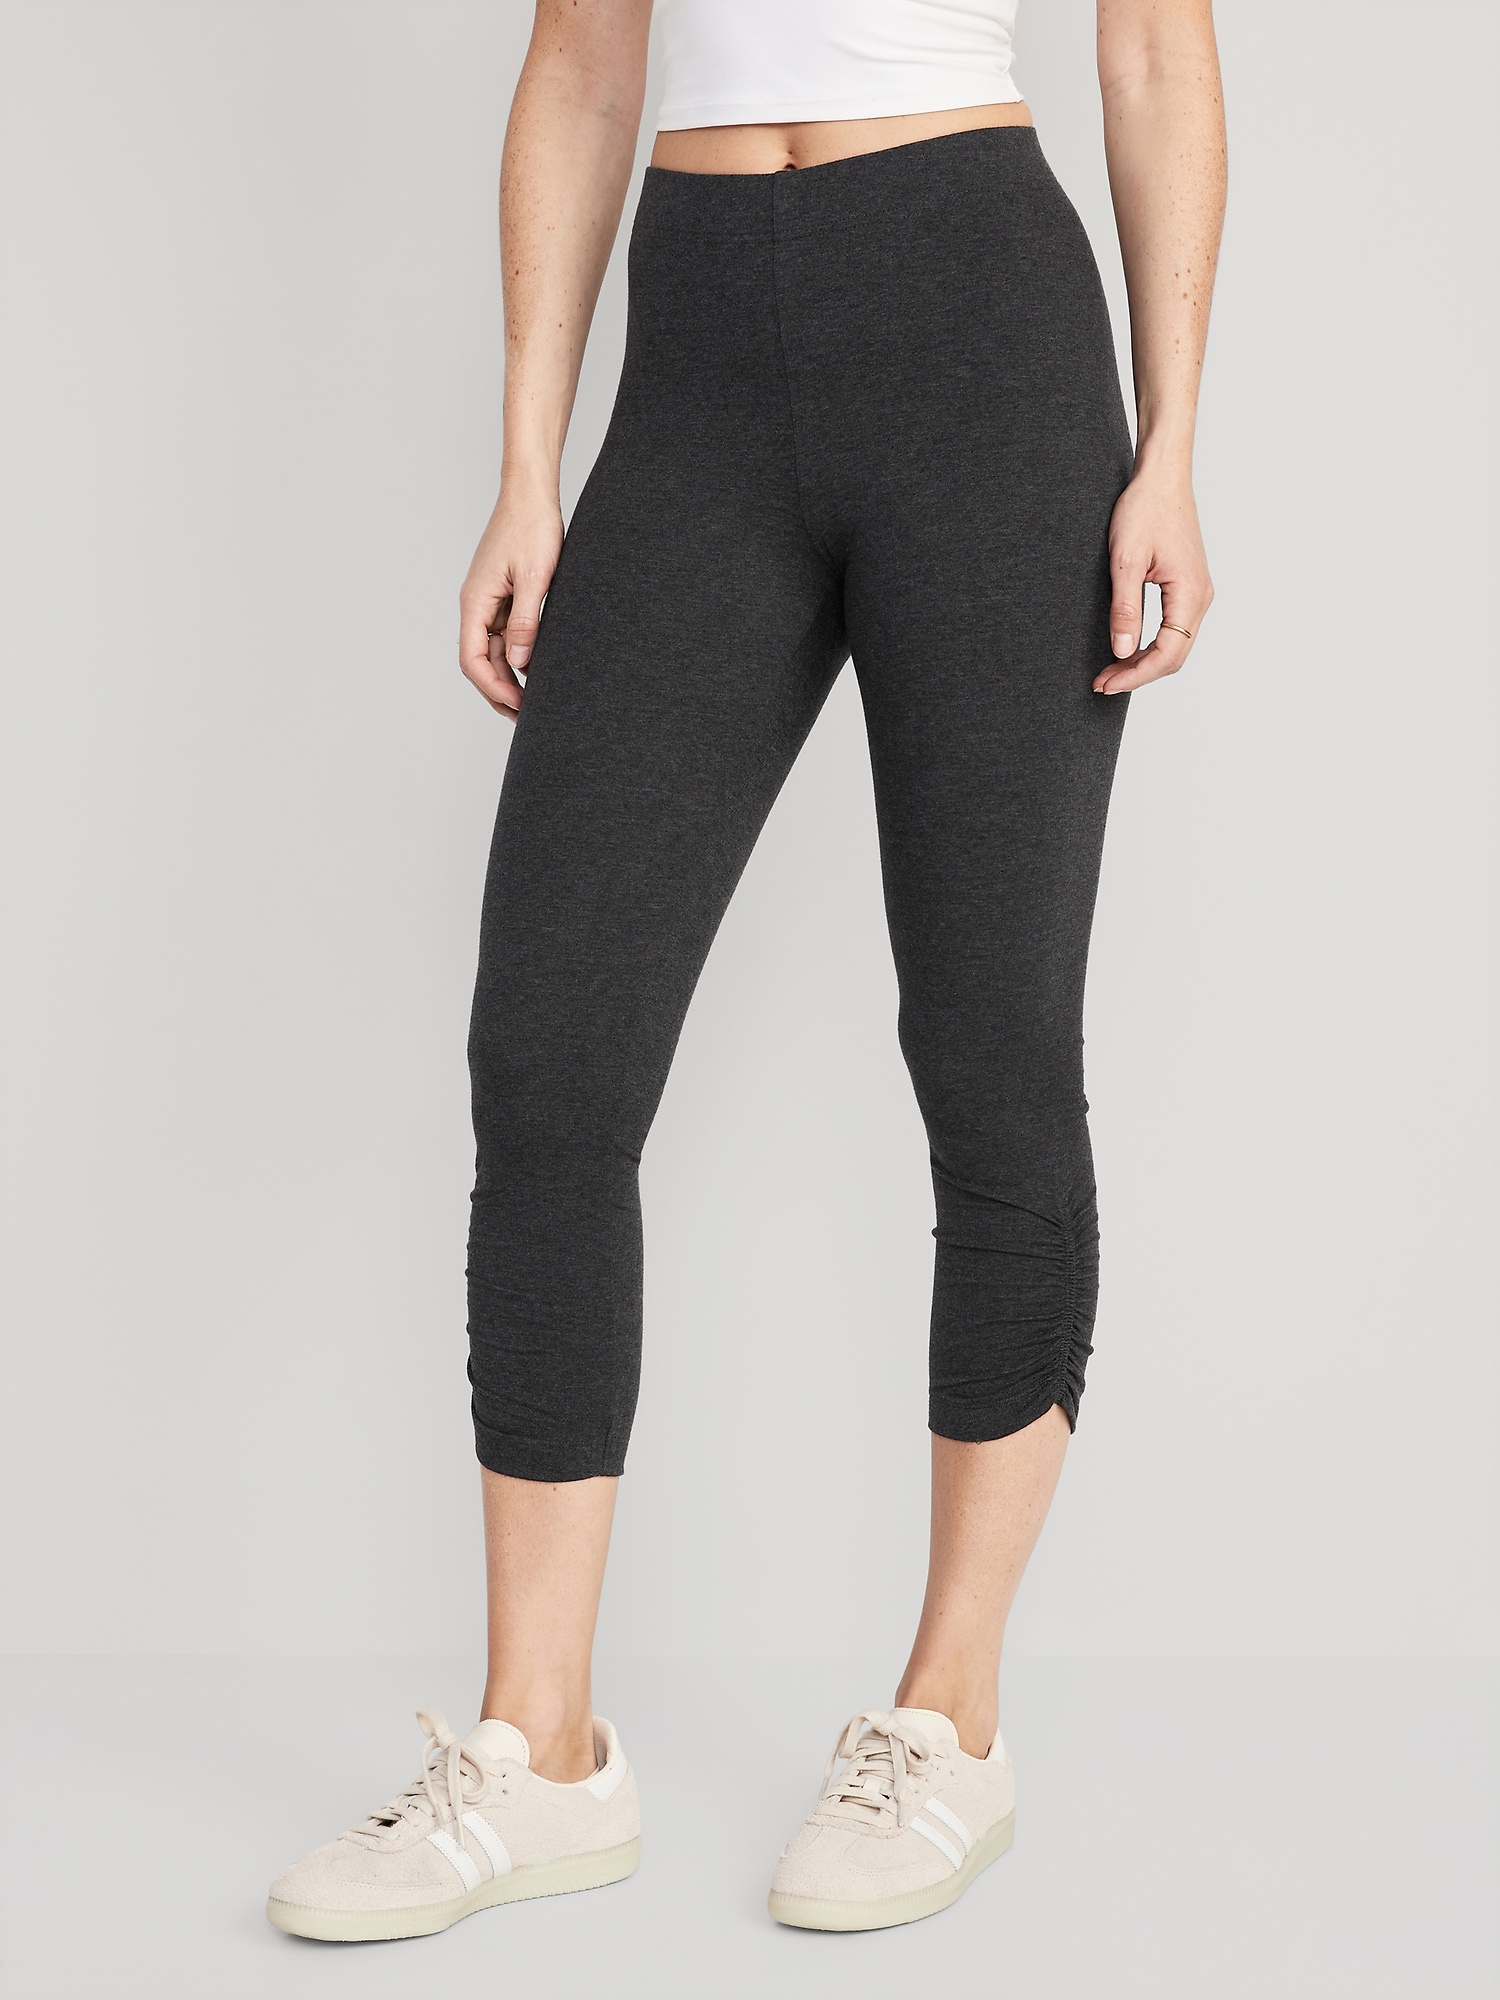 Old Navy Active Leggings Gray - $5 - From Karlee